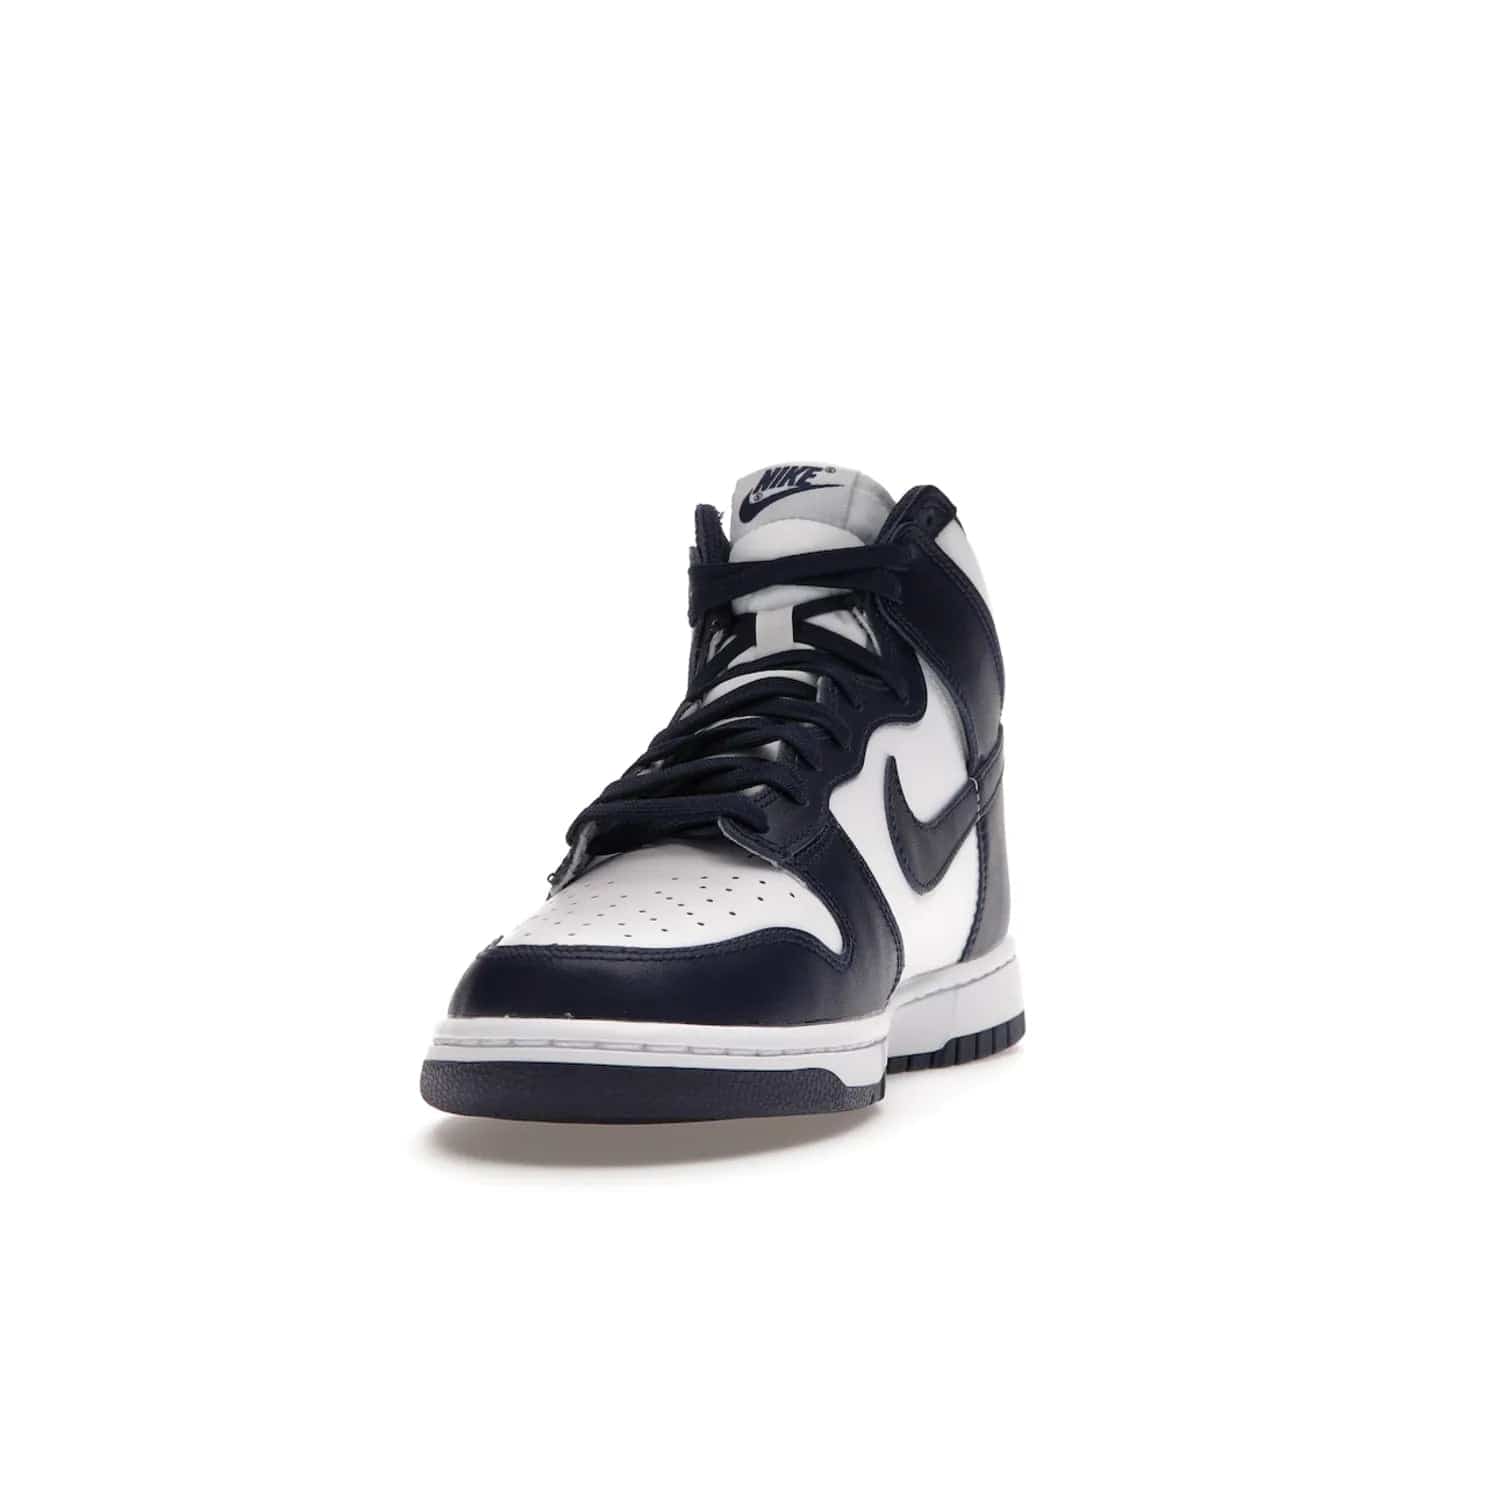 Nike Dunk High Championship Navy - Image 12 - Only at www.BallersClubKickz.com - Classic Nike Dunk High sneaker delivers an unforgettable style with white leather upper, Championship Navy overlays, and matching woven tongue label and sole. Make a statement with the Championship Navy today.